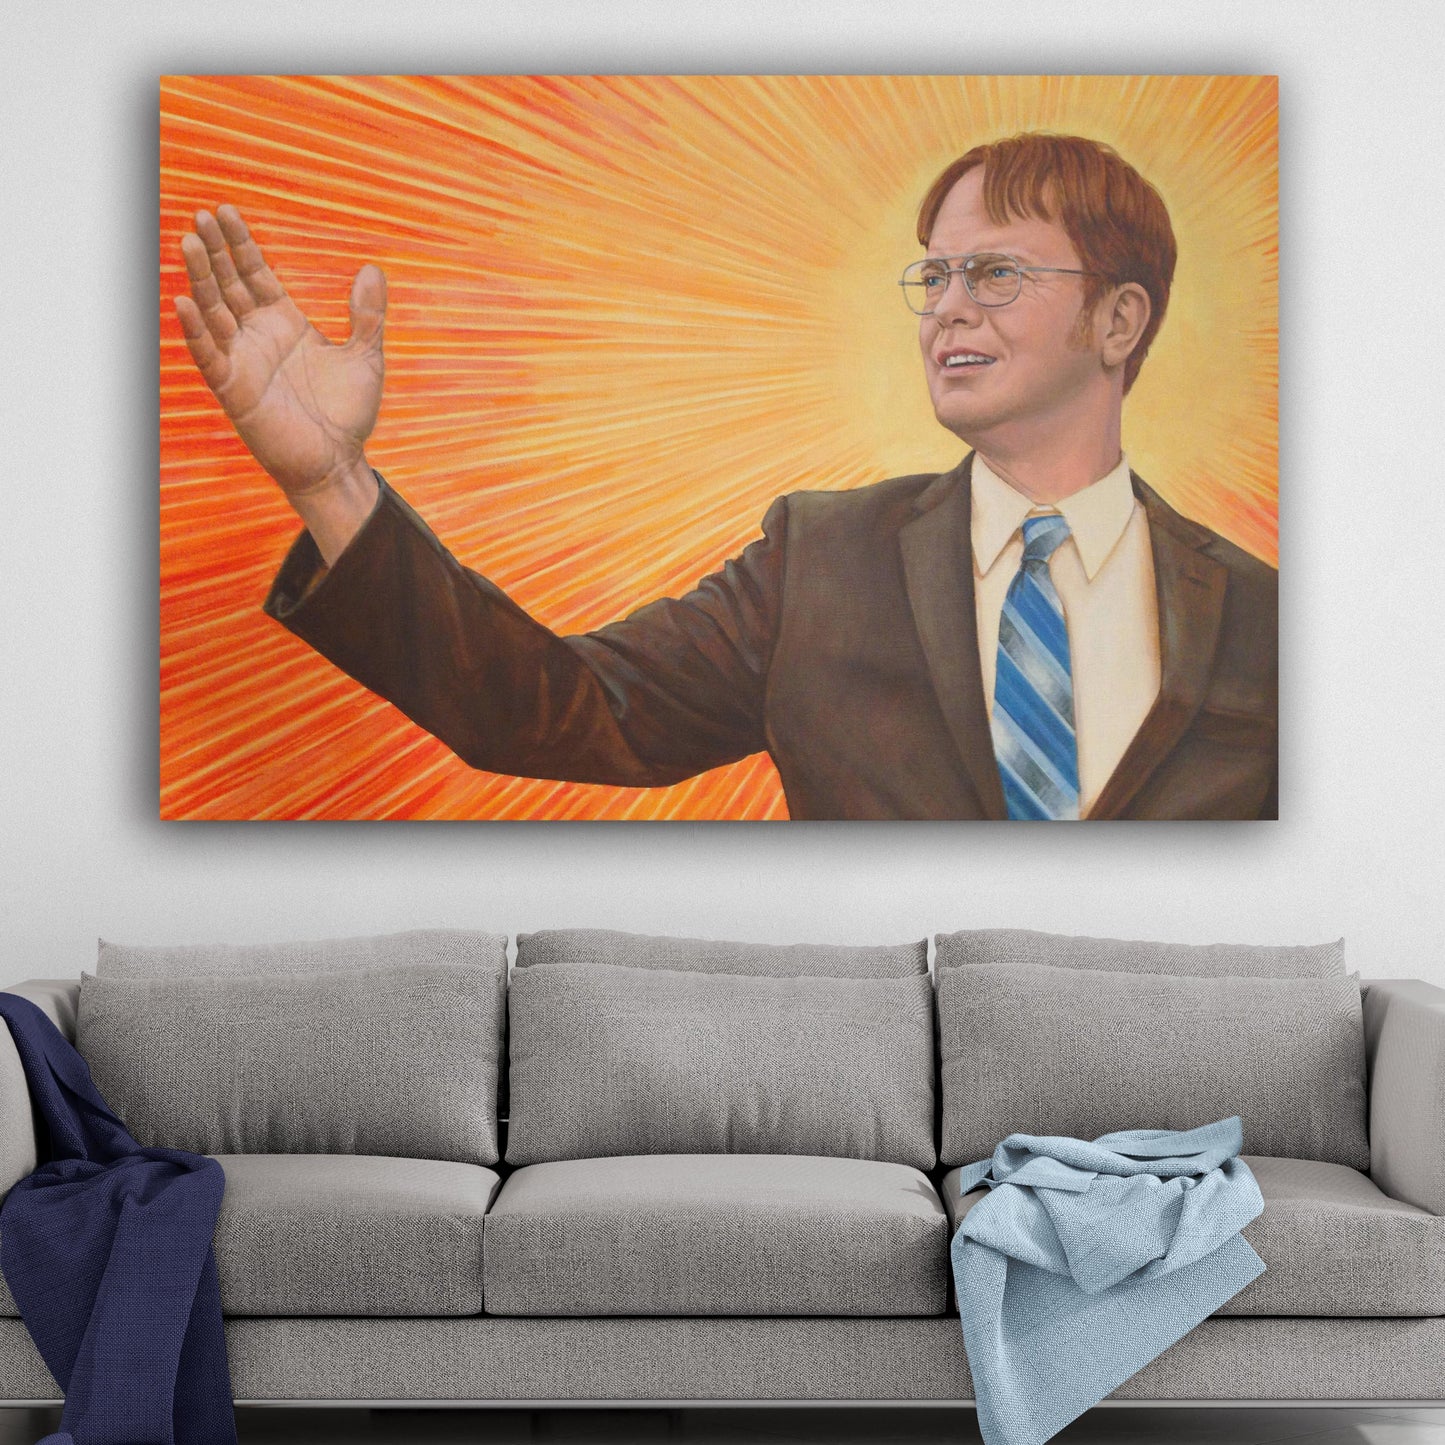 The Office Dwight Schrute Messiah